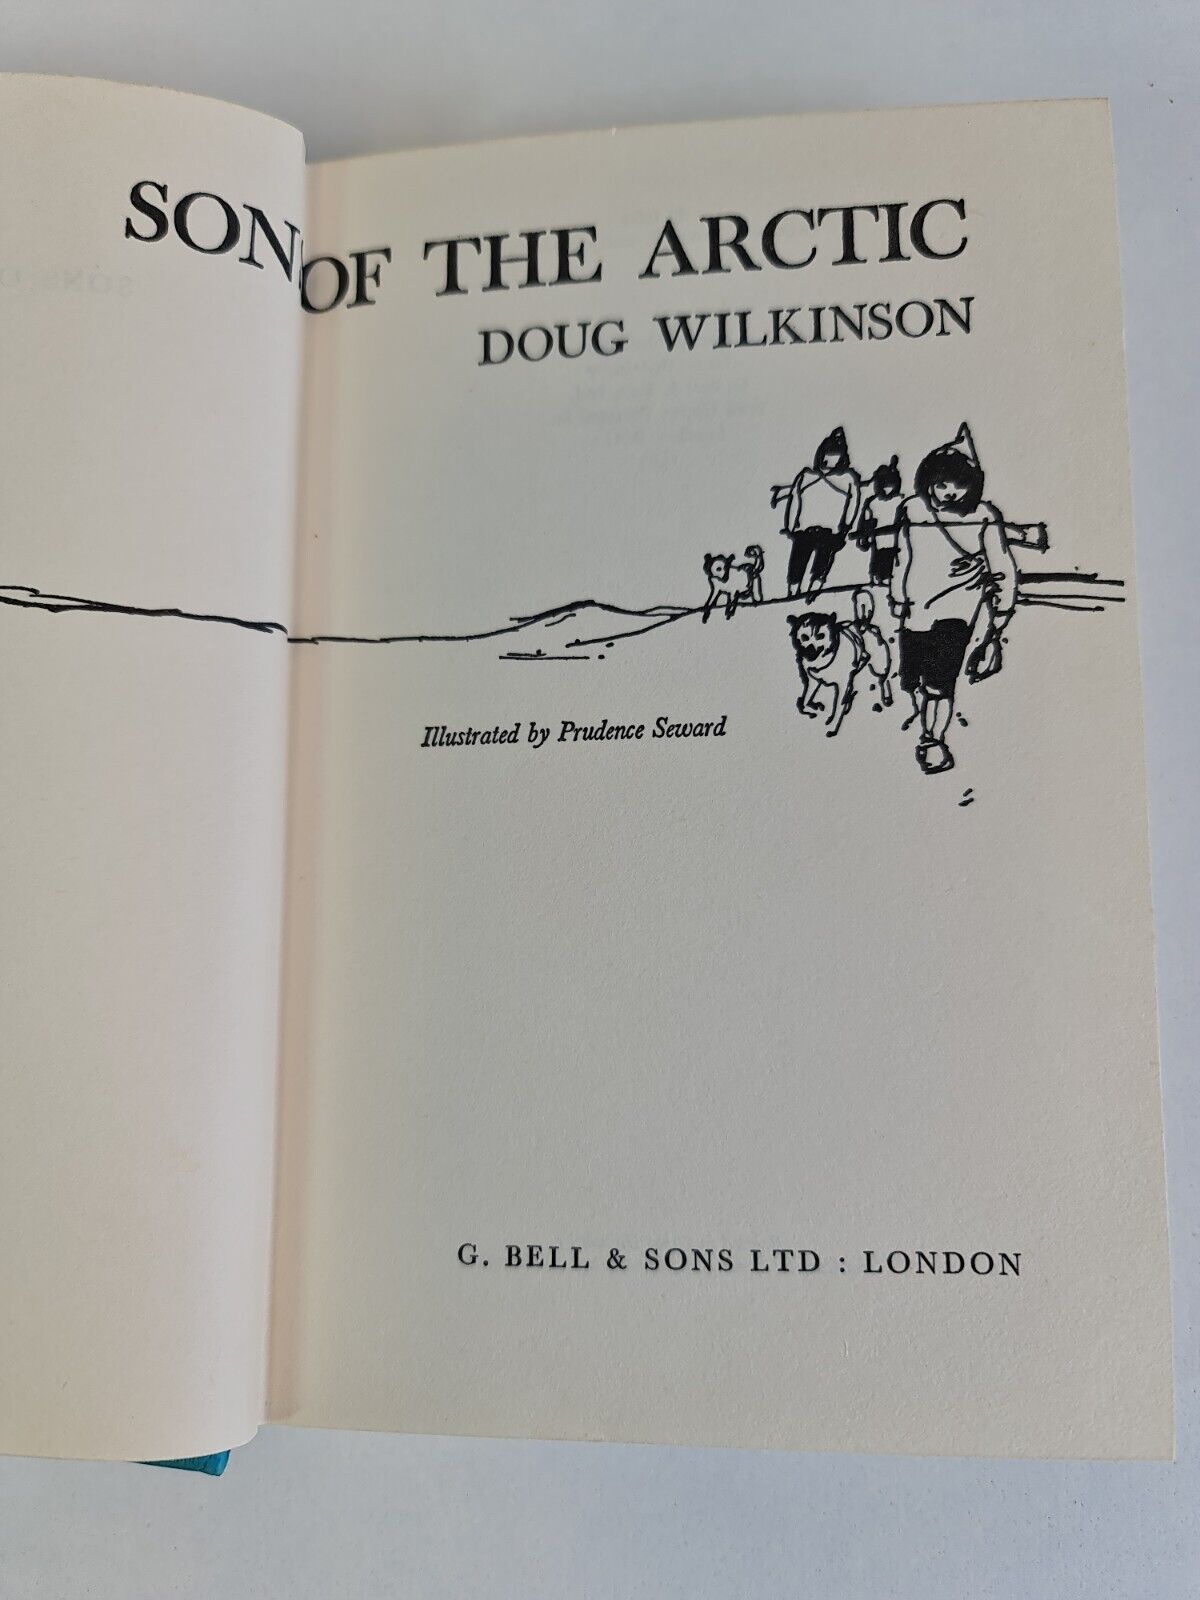 Sons of the Arctic by Doug Wilkinson (1967)